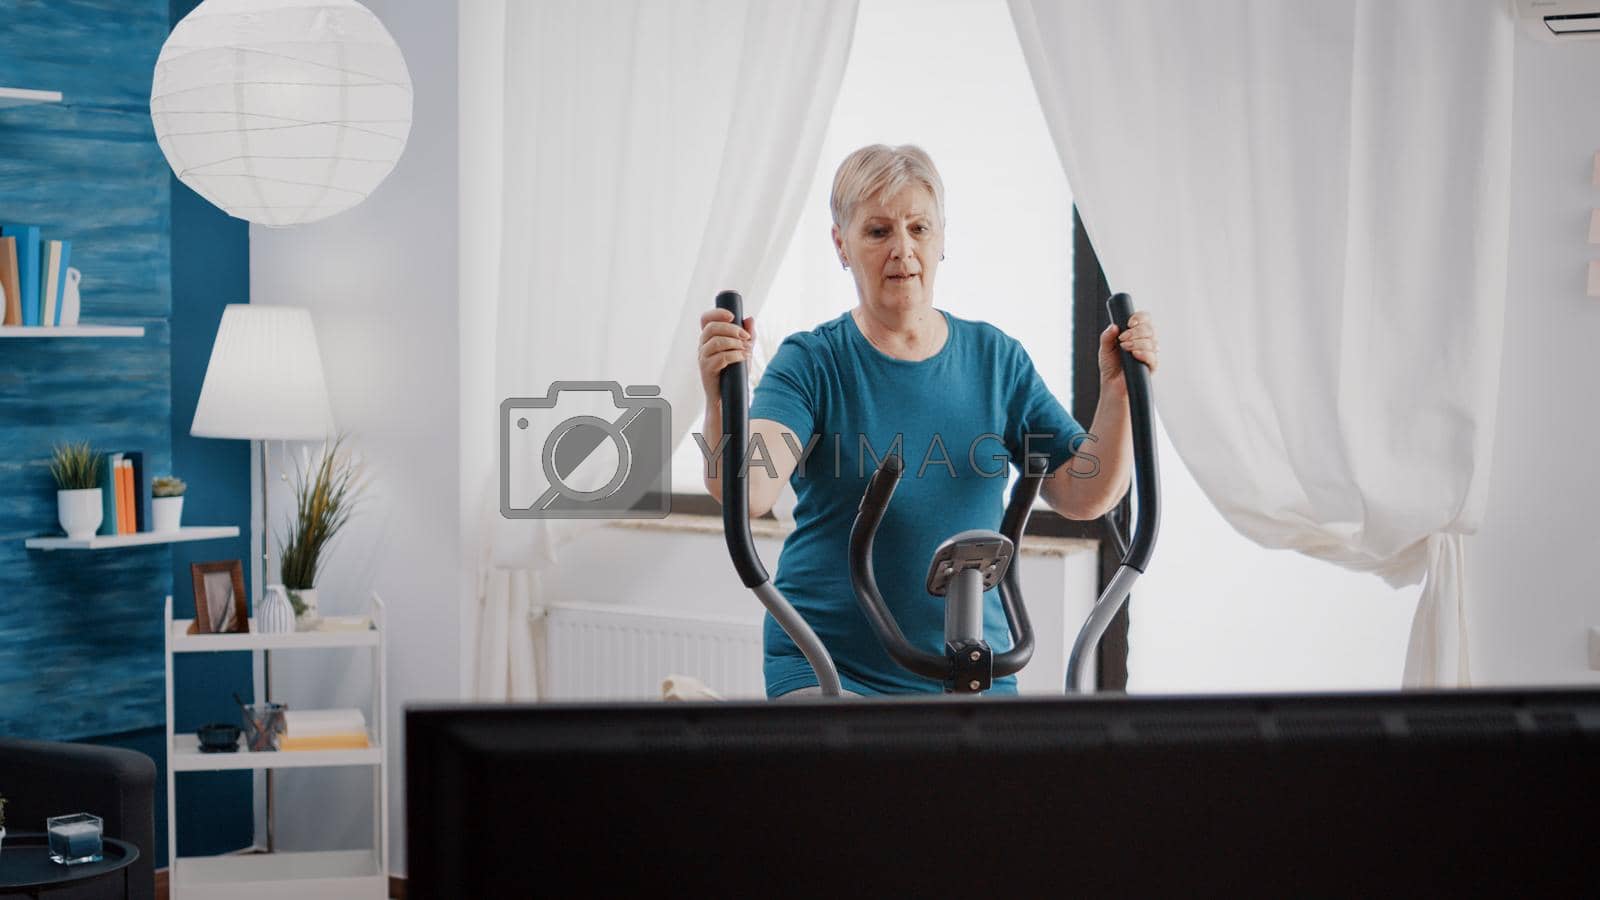 Royalty free image of Elder person training on electronic stationary bicycle by DCStudio